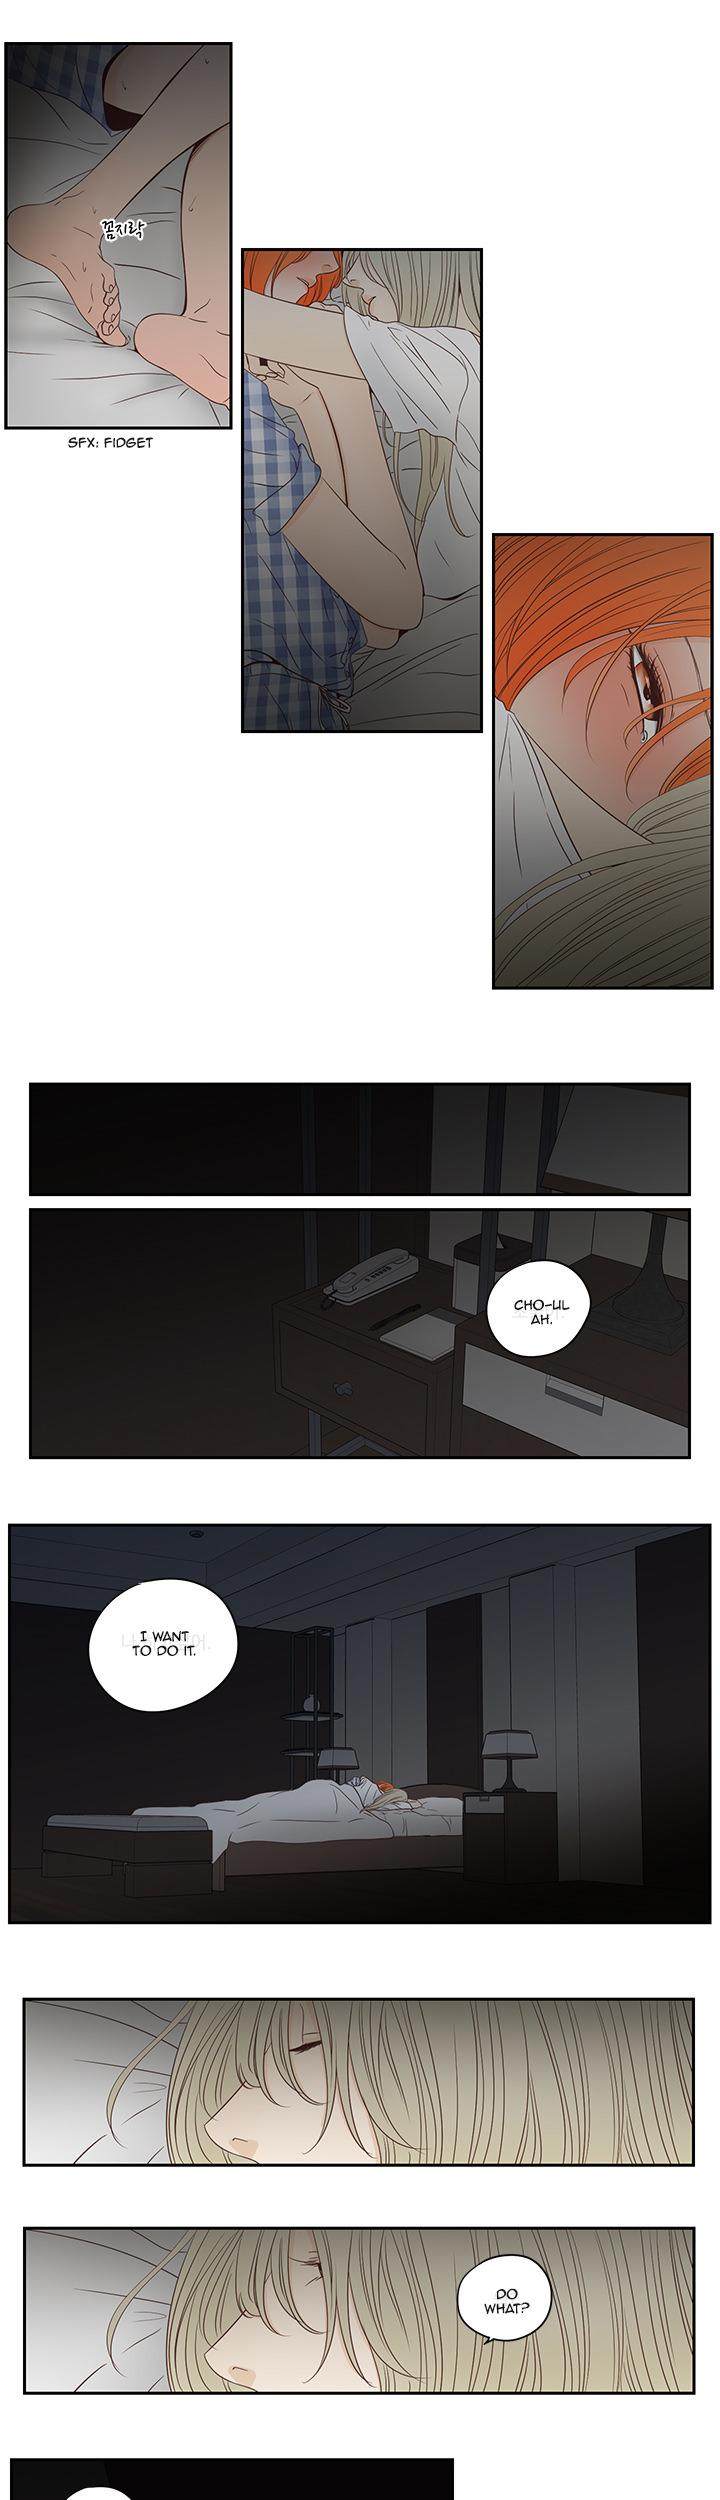 Pet’s Aesthetics - Chapter 3 Page 5